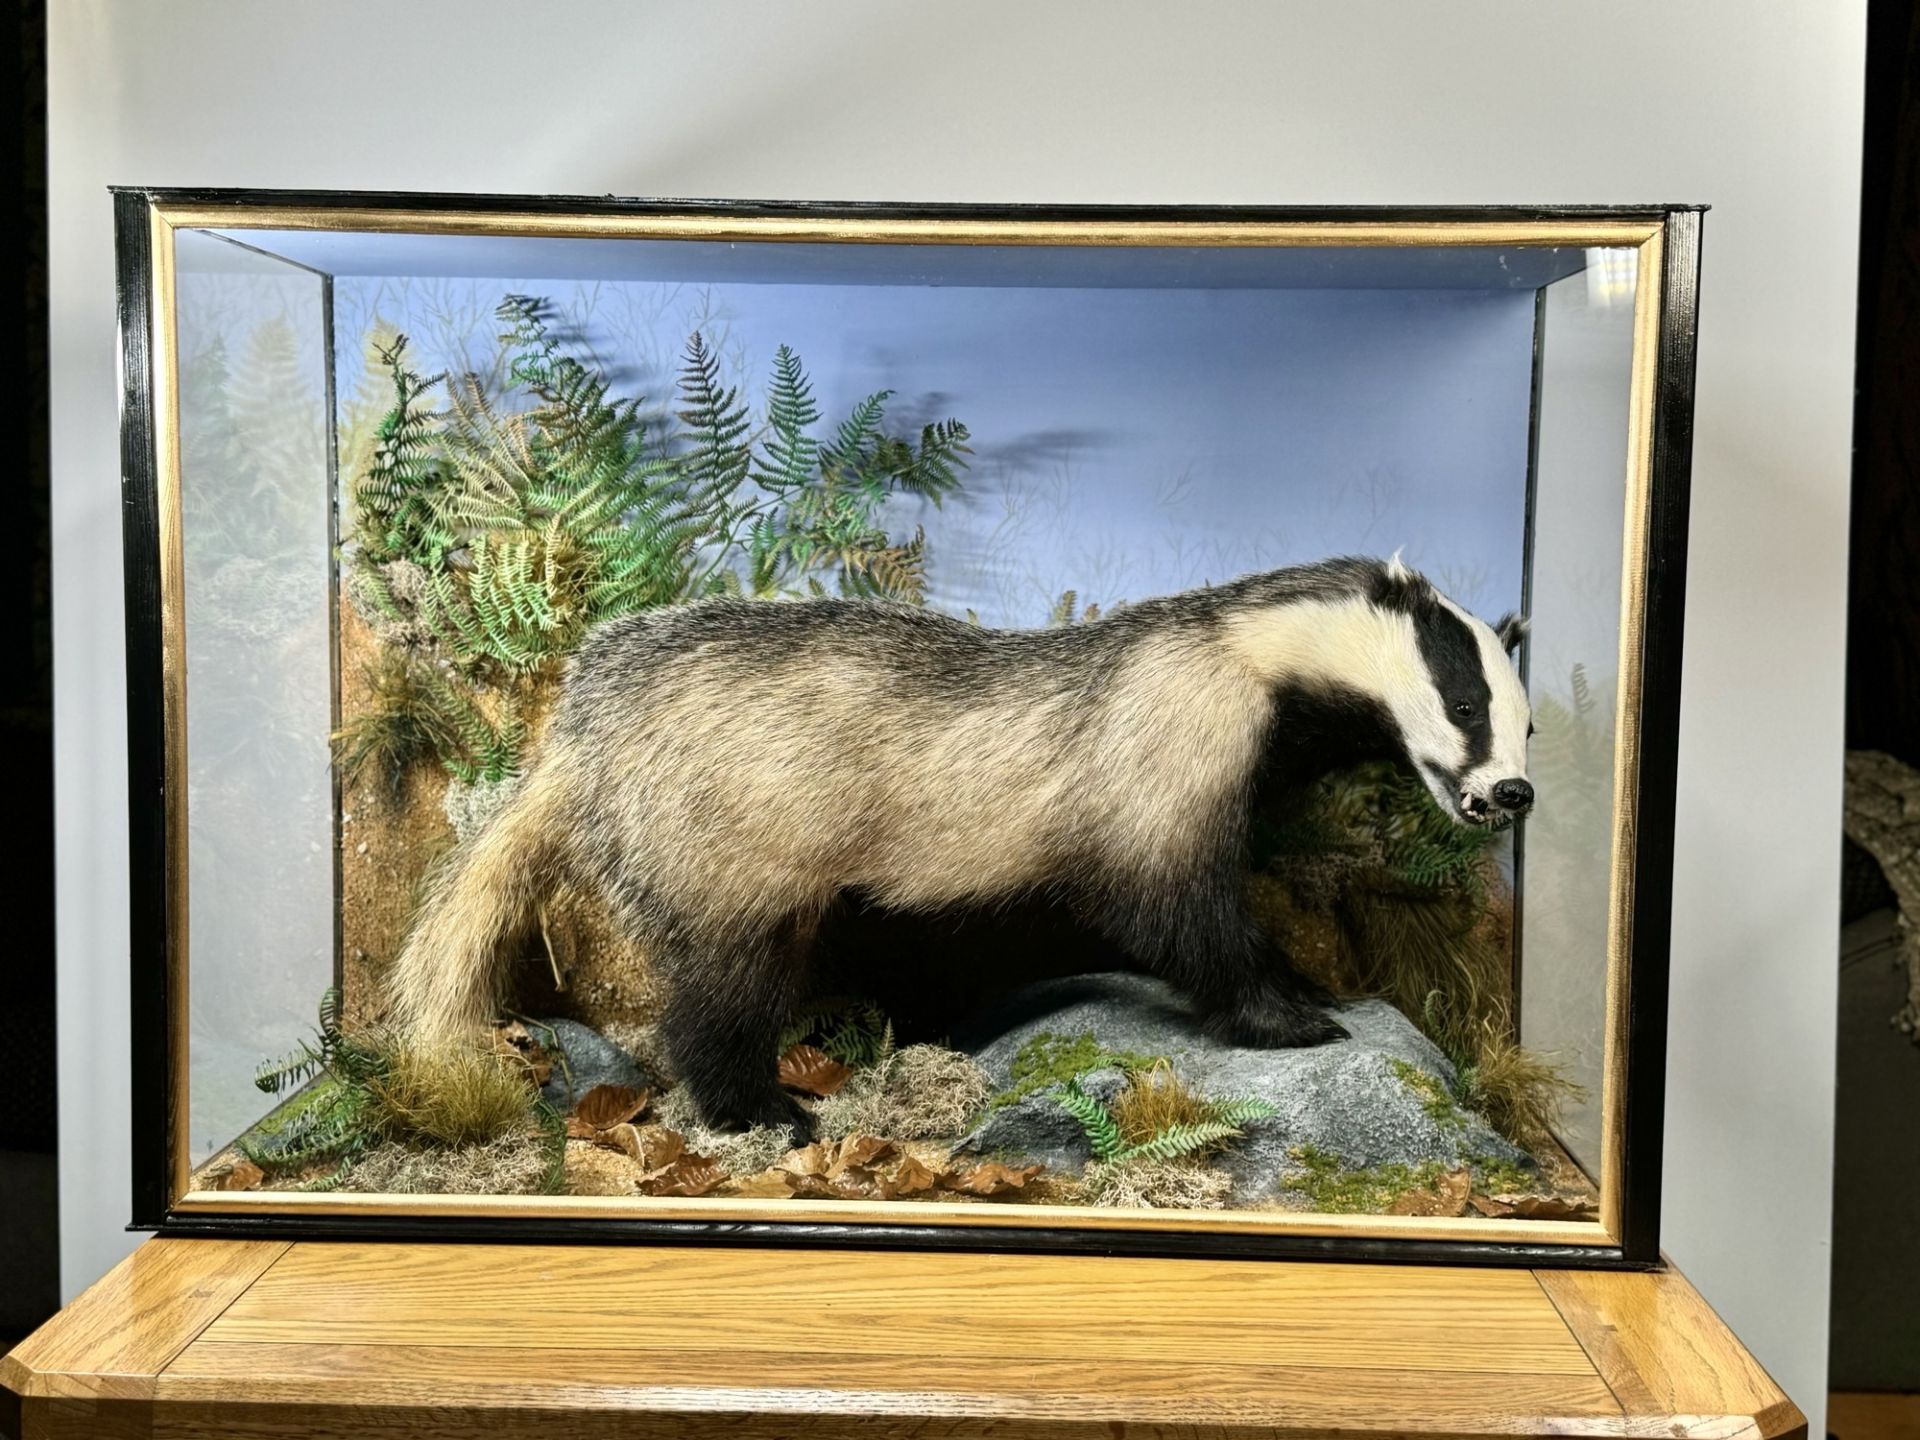 TAXIDERMY: A CASED STUDY OF A BADGER IN A NATURALISTIC SETTING, W 92 X D 41 X H 63CM.